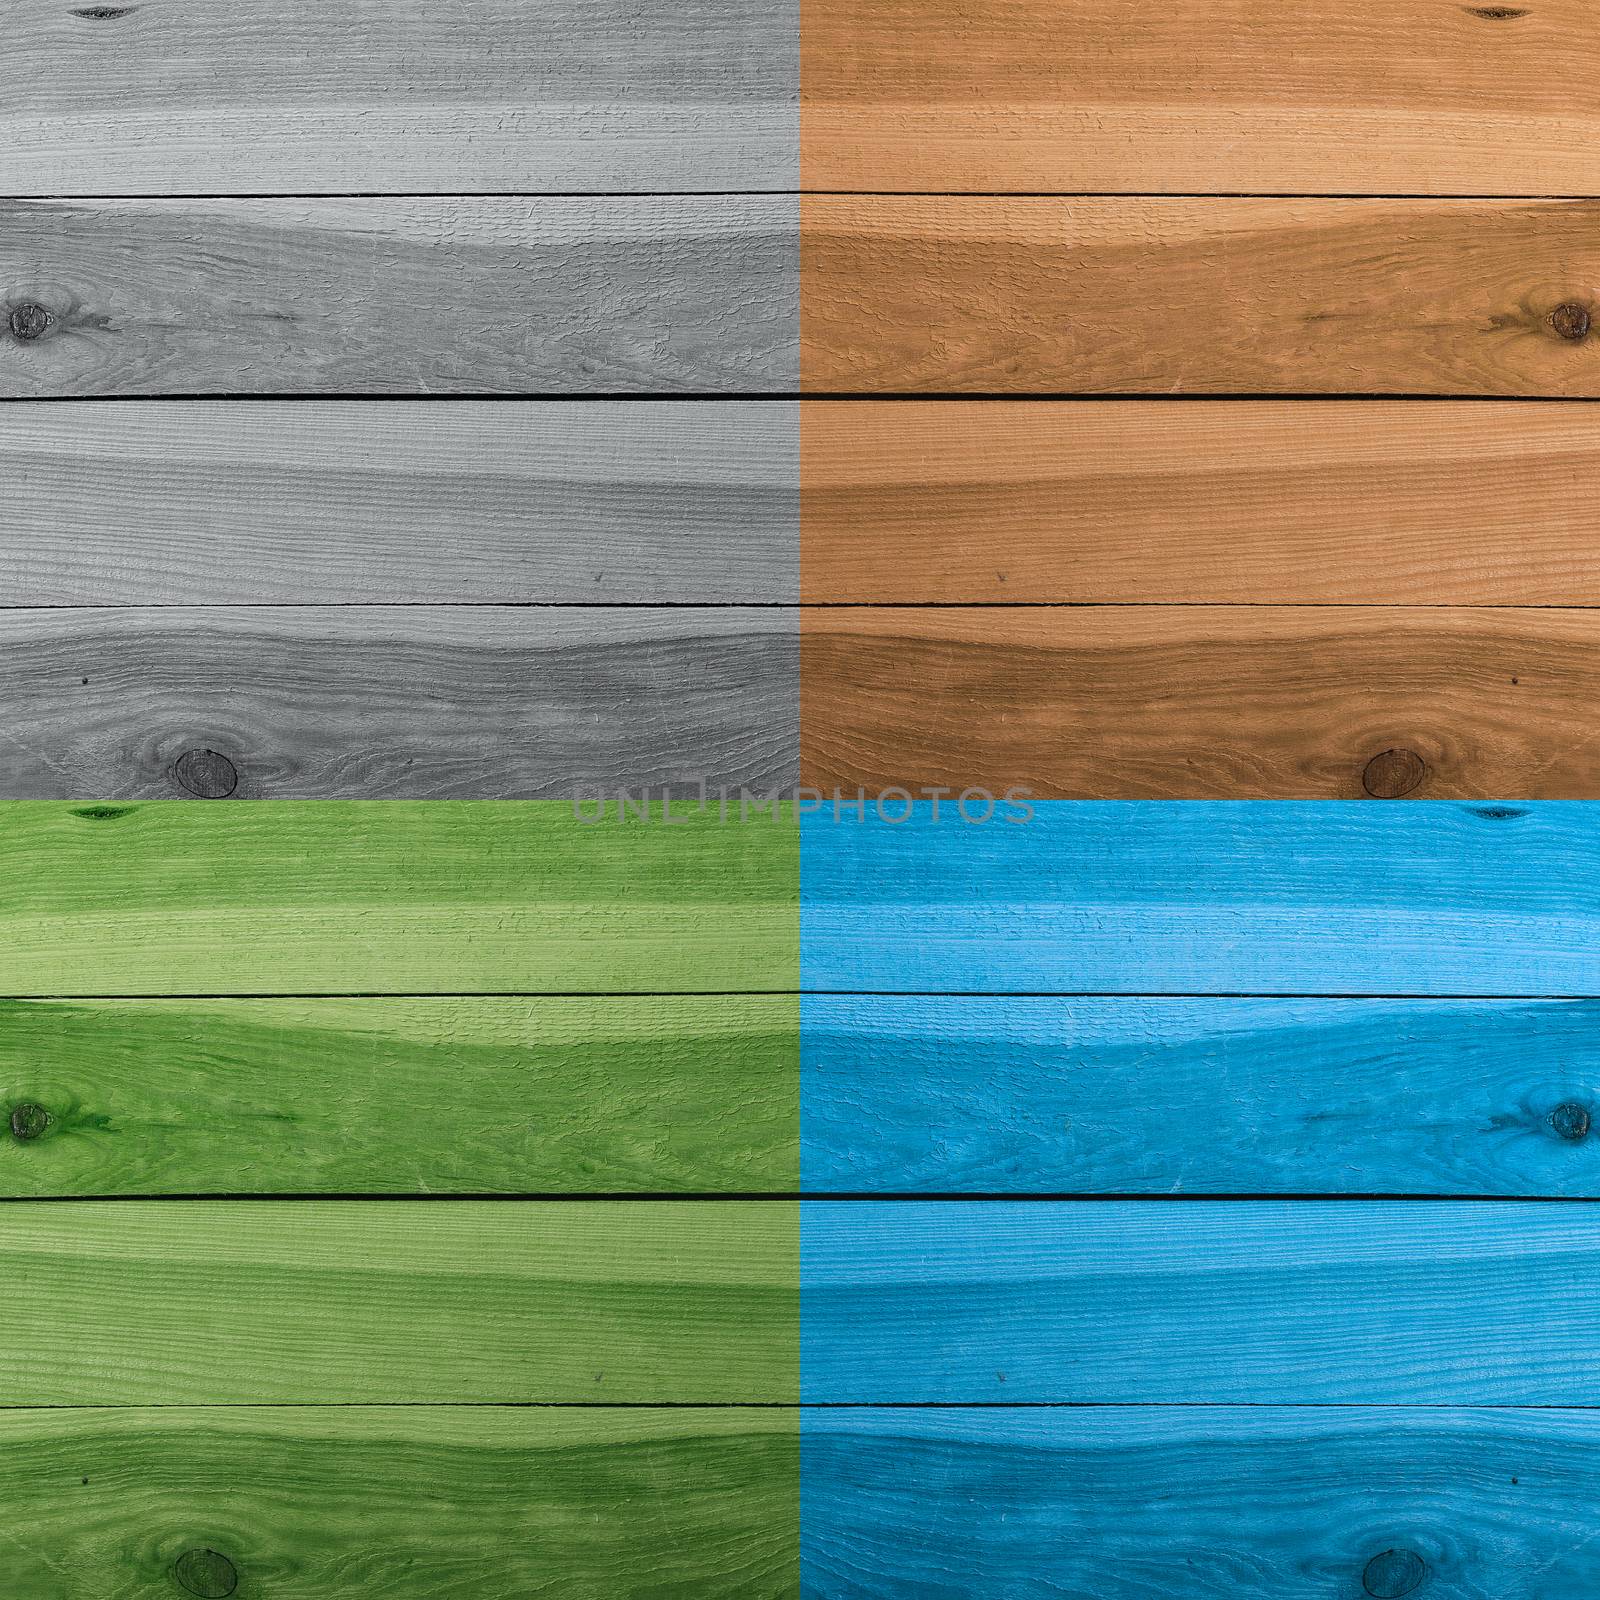 Grunge plank wood texture background. Collage of wooden surfaces four different colors